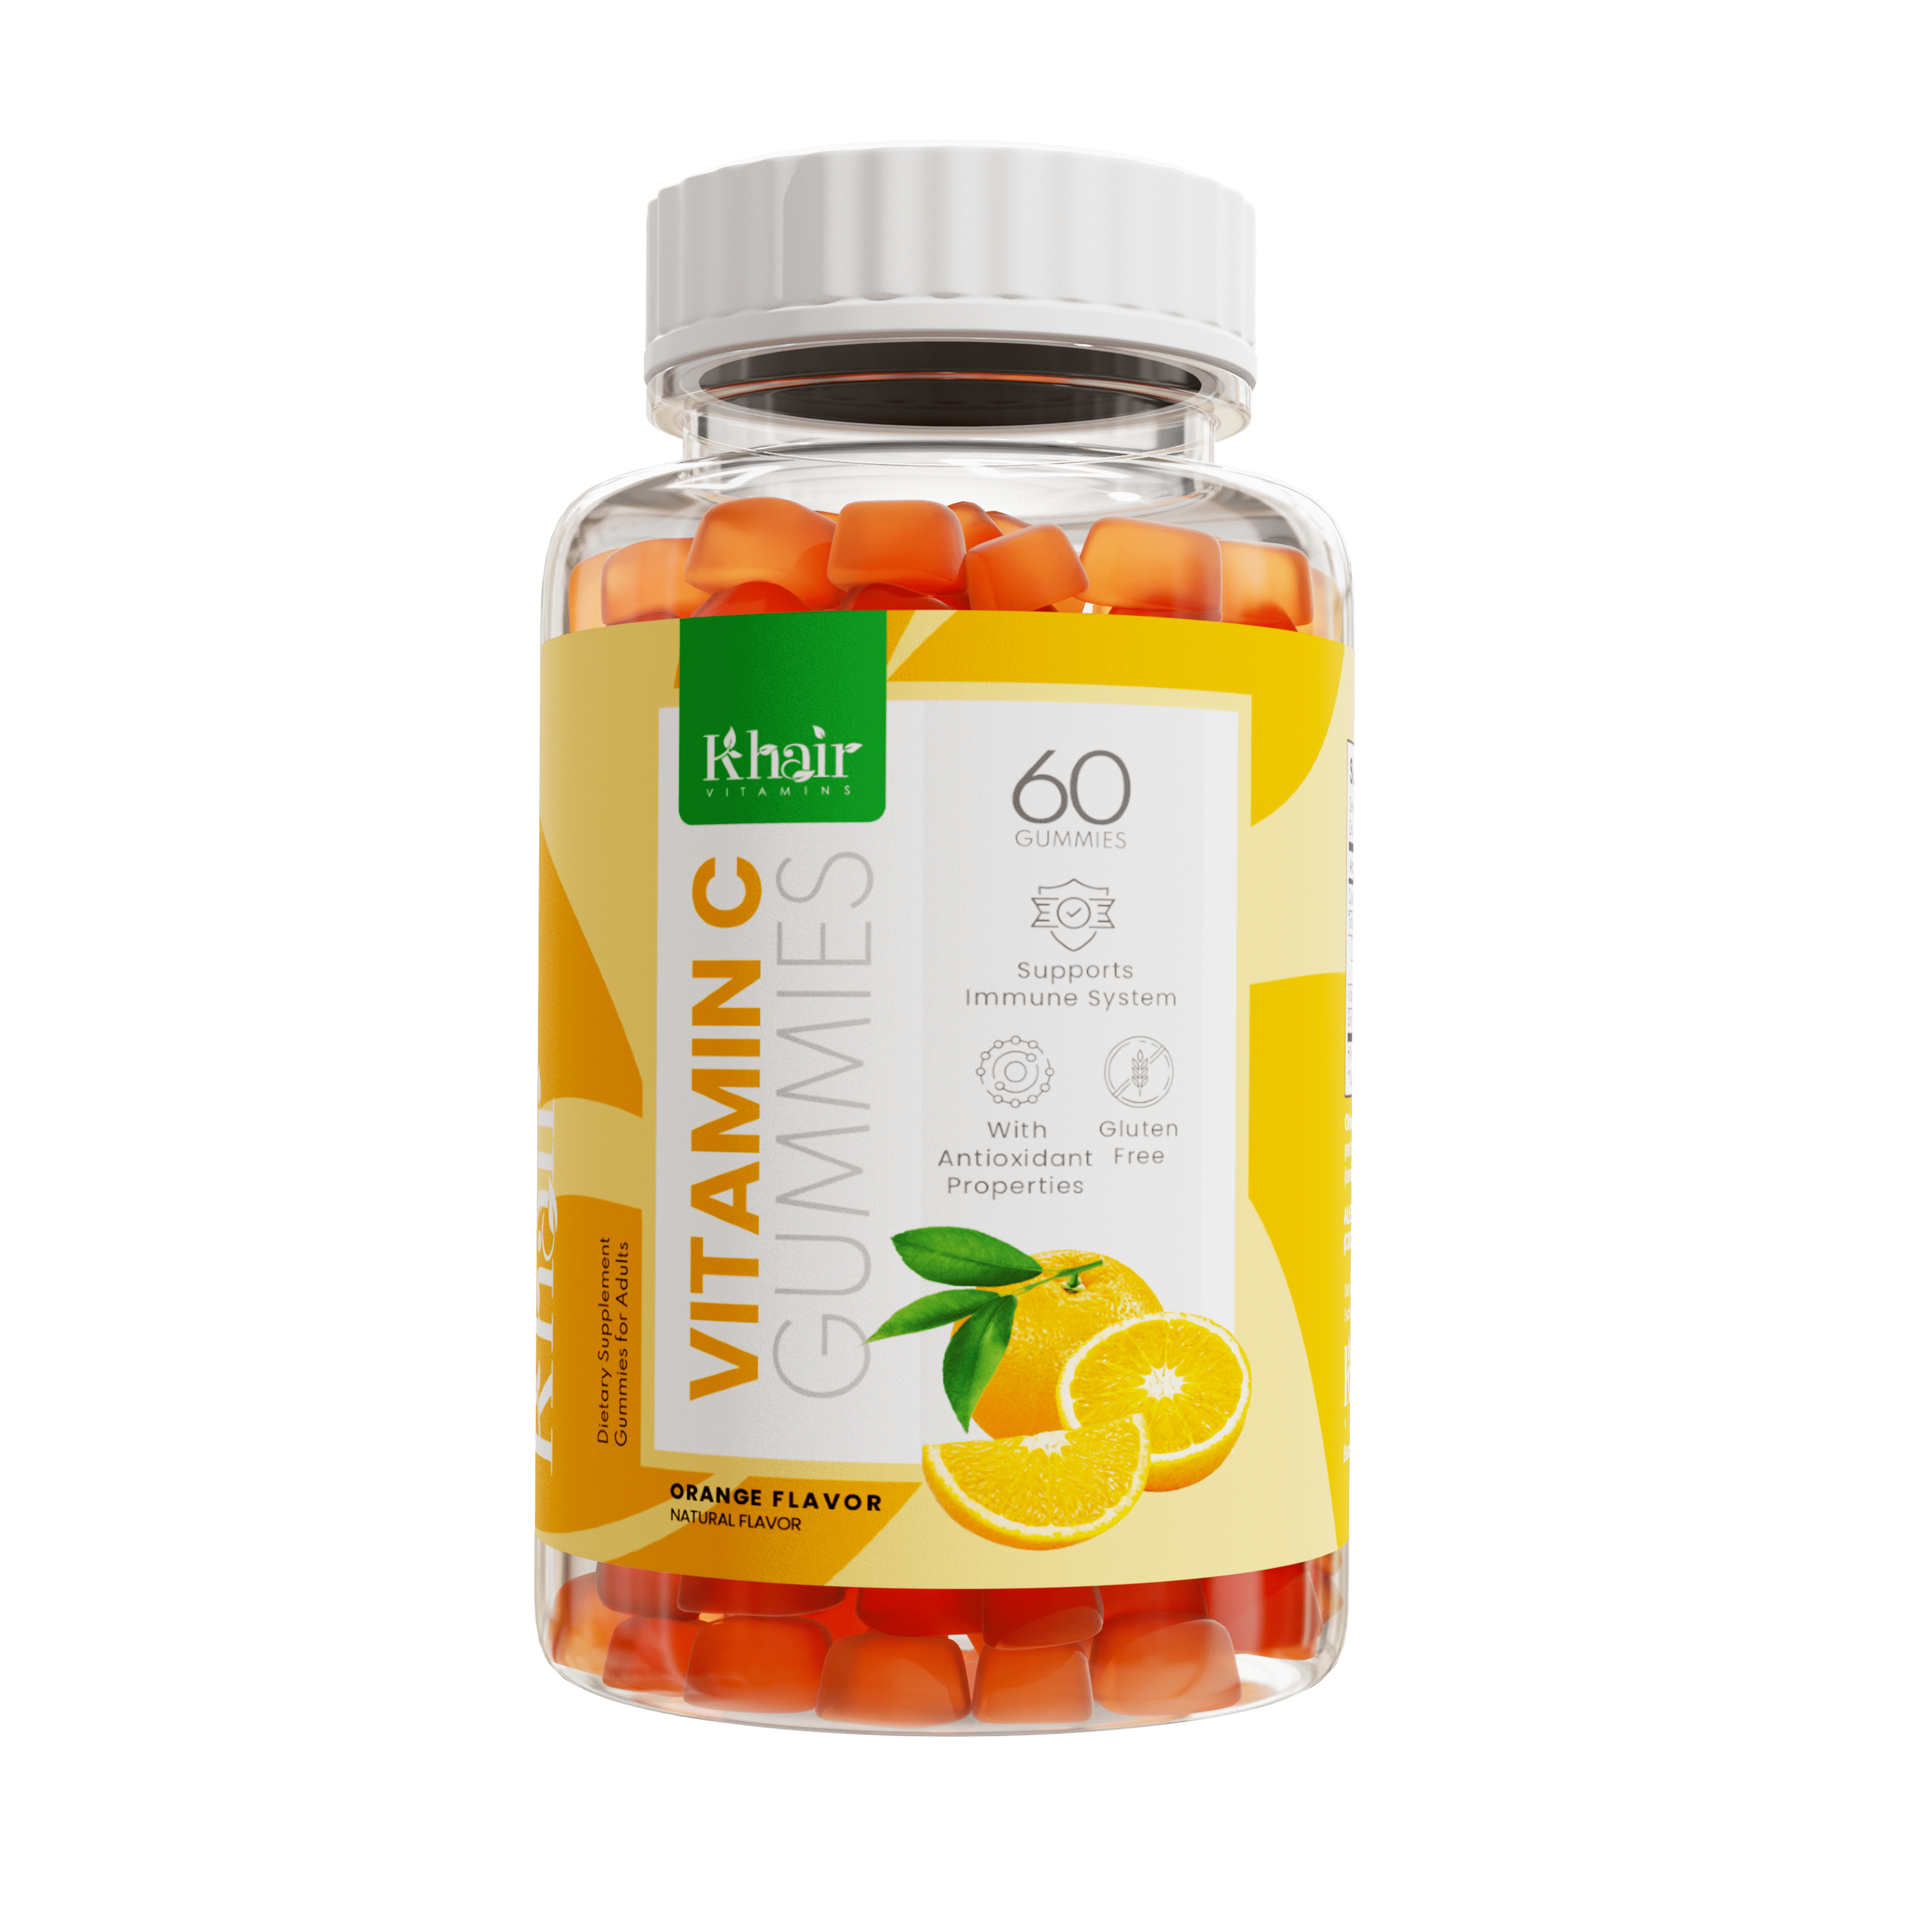 Bottle of 'Khair' Vitamin C gummies with an orange label, 60 pieces, orange flavor. Label includes benefits like immune system support and antioxidant properties, and notes the product is gluten-free